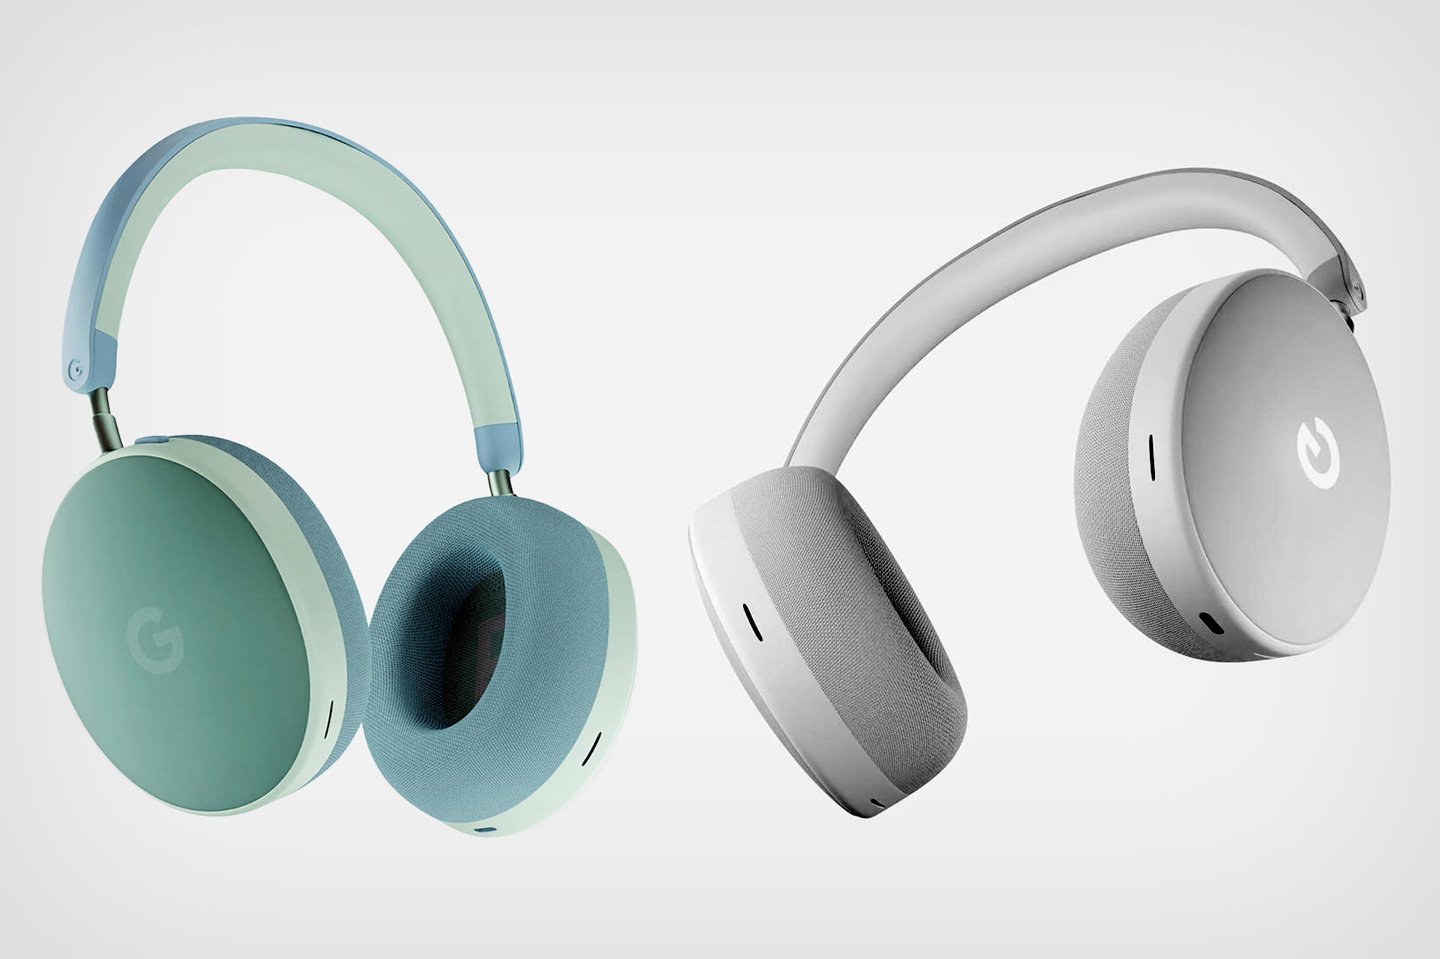 #Google Pixel Headphones concept shows what the Android answer to the AirPods Max could be